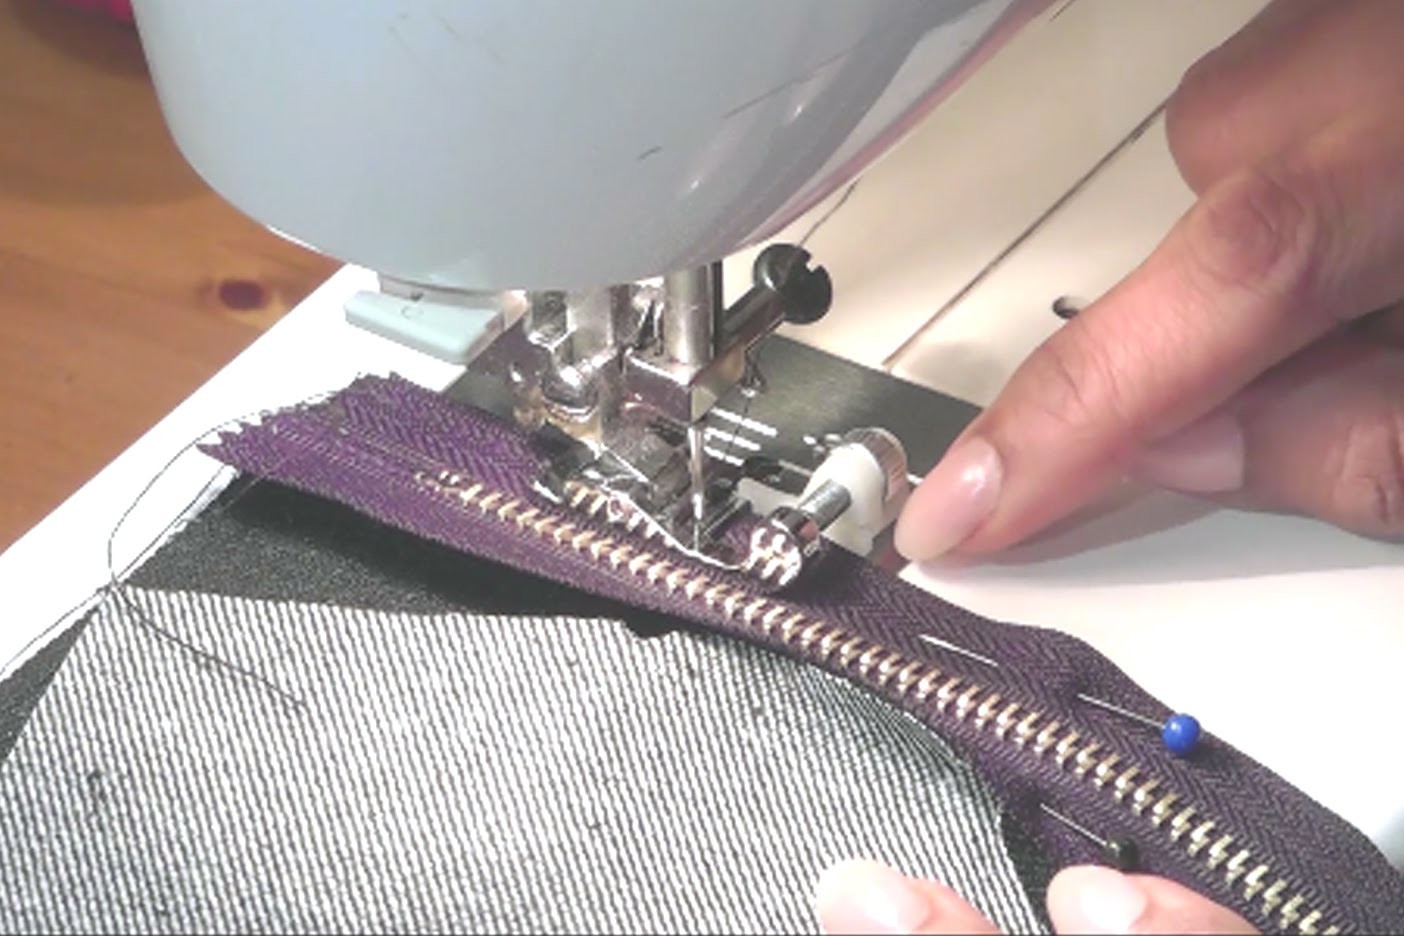 Cut n Sew Zipper, how to sew zipper to the lining of the bag